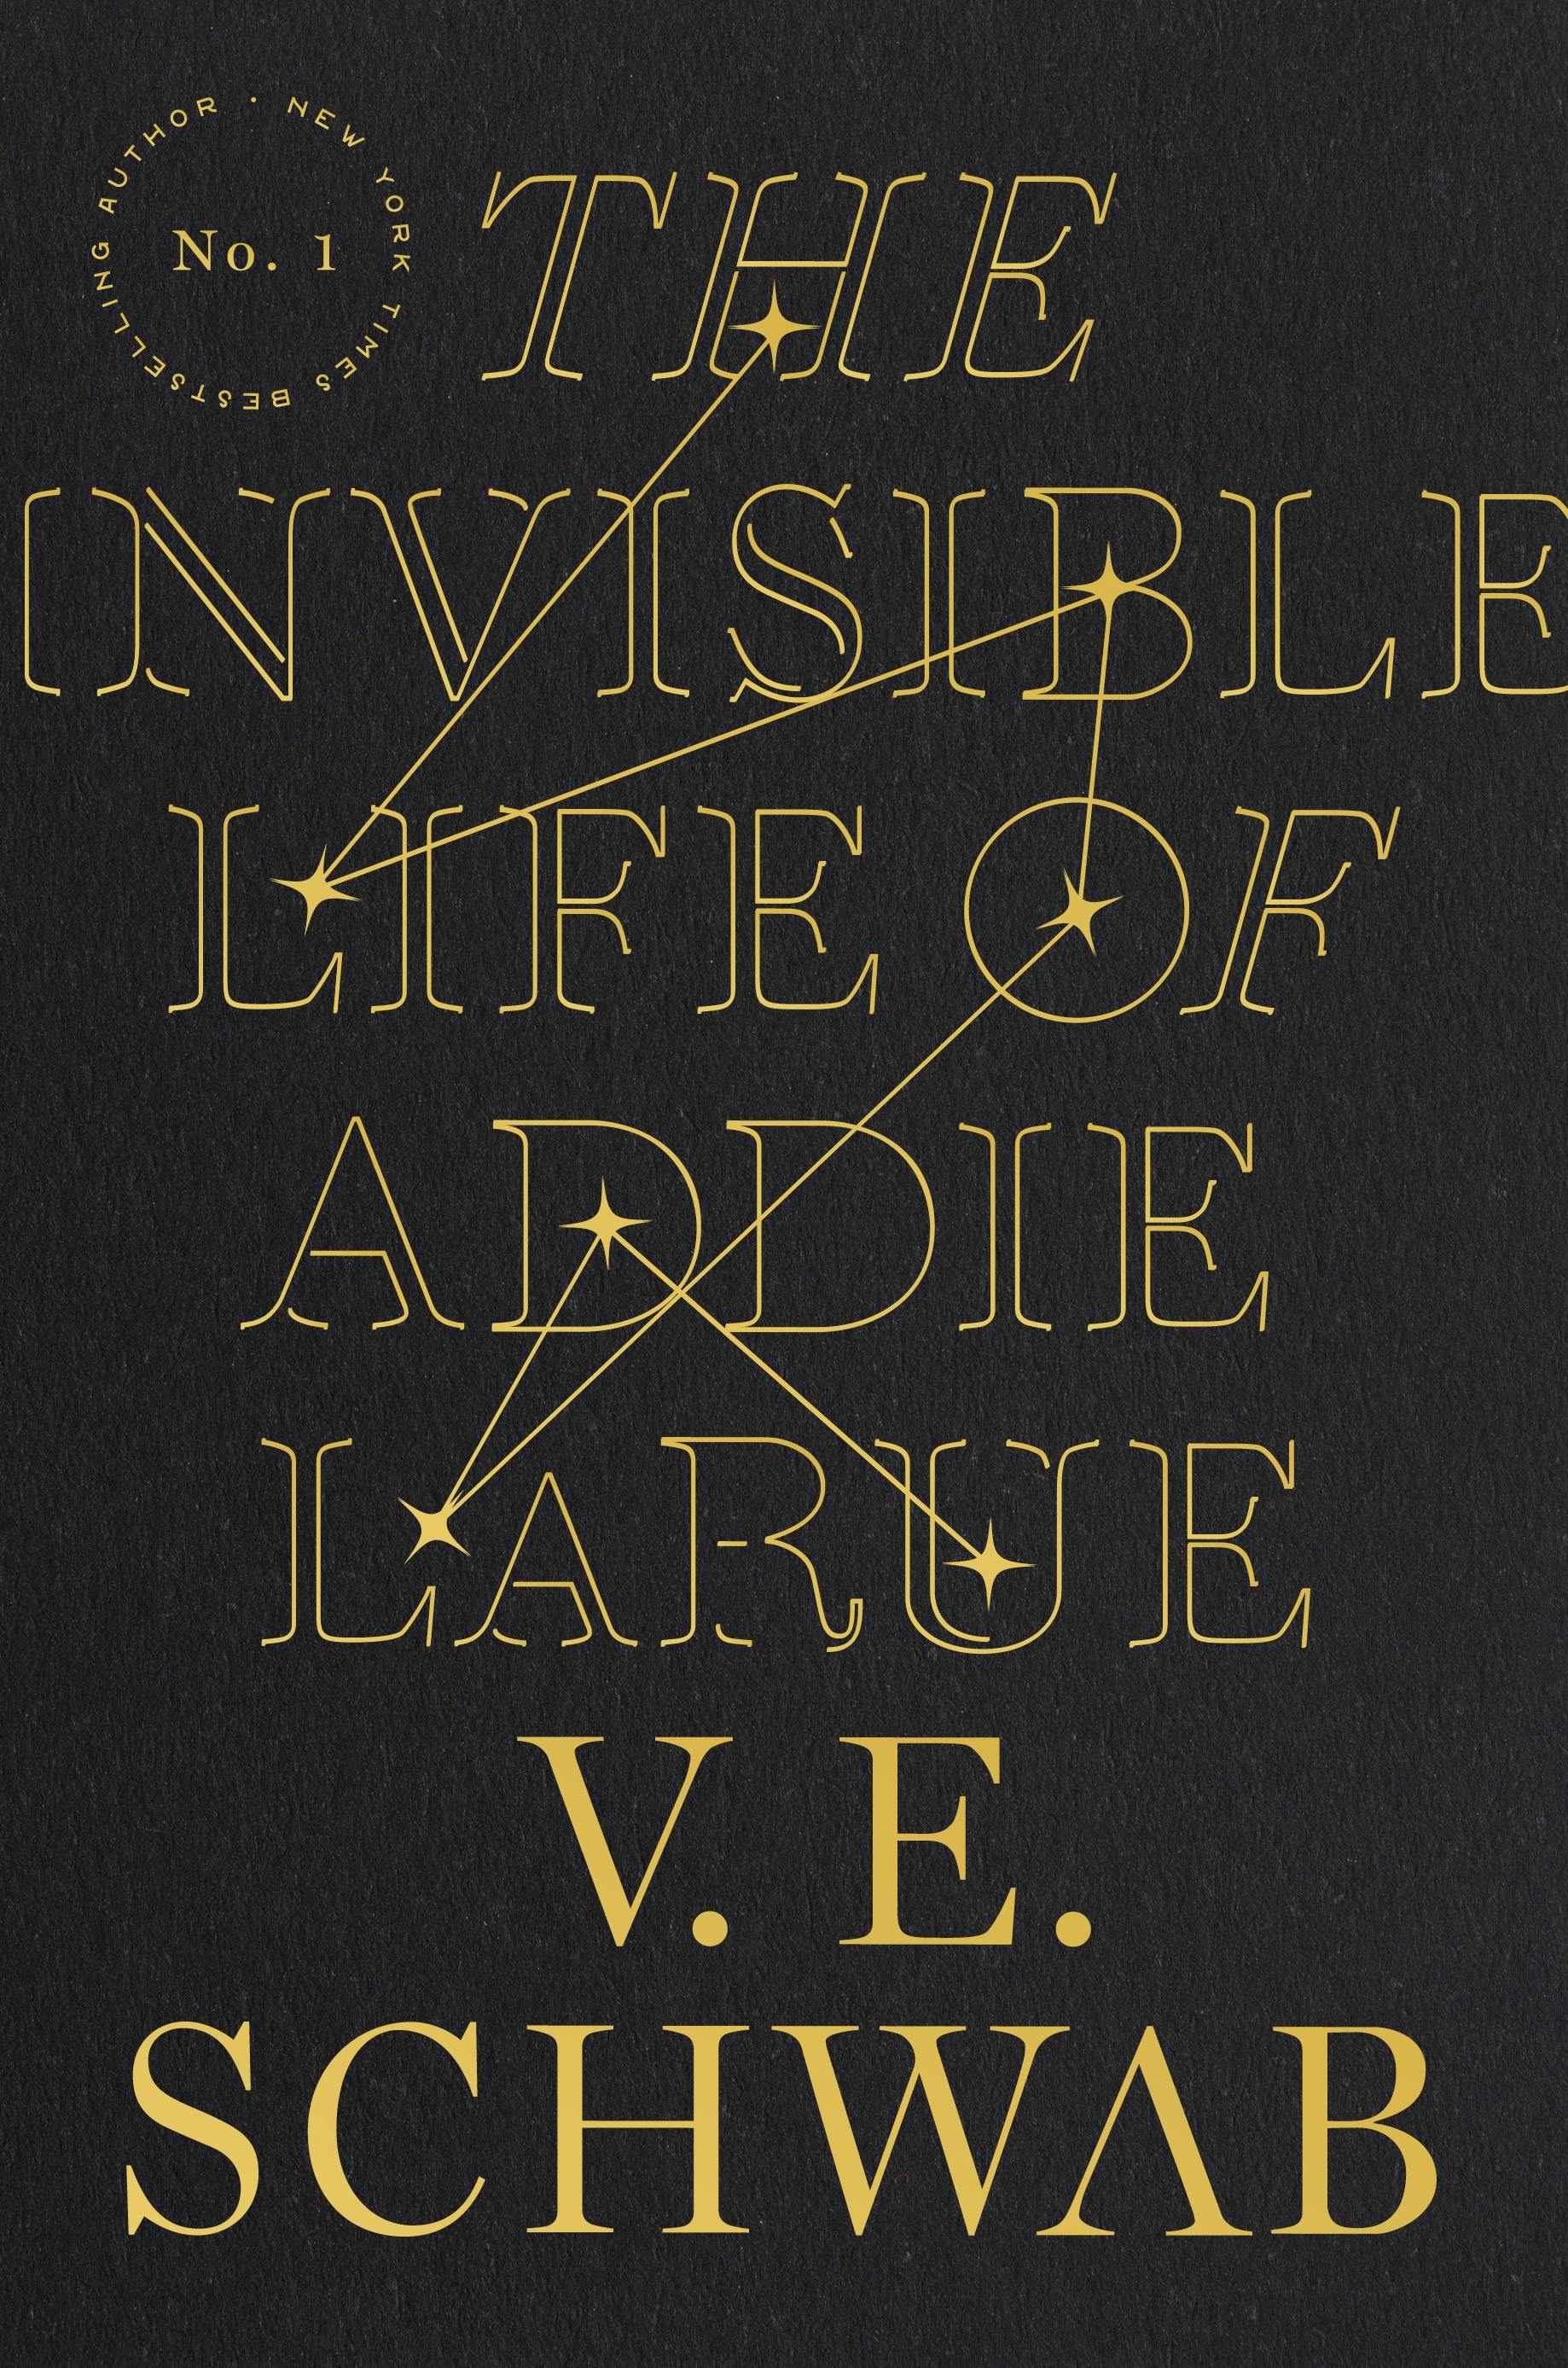 Cover for the book titled as: The Invisible Life of Addie LaRue